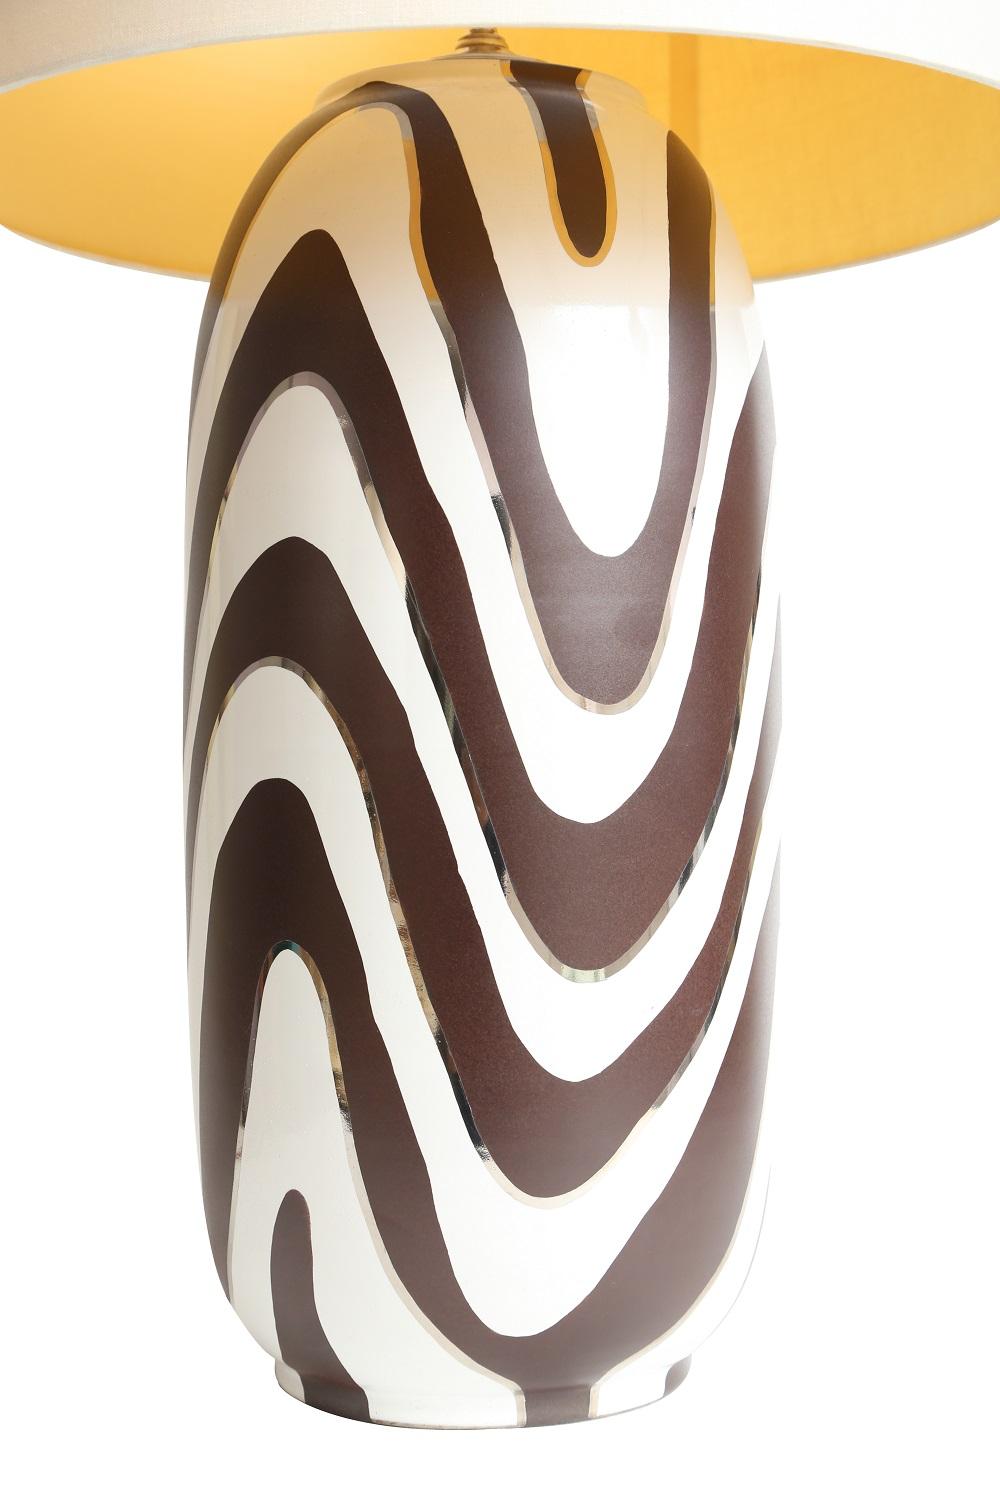 Waylande Gregory zebra table lamp in white, platinum and brown.

Dimensions: 
D 9